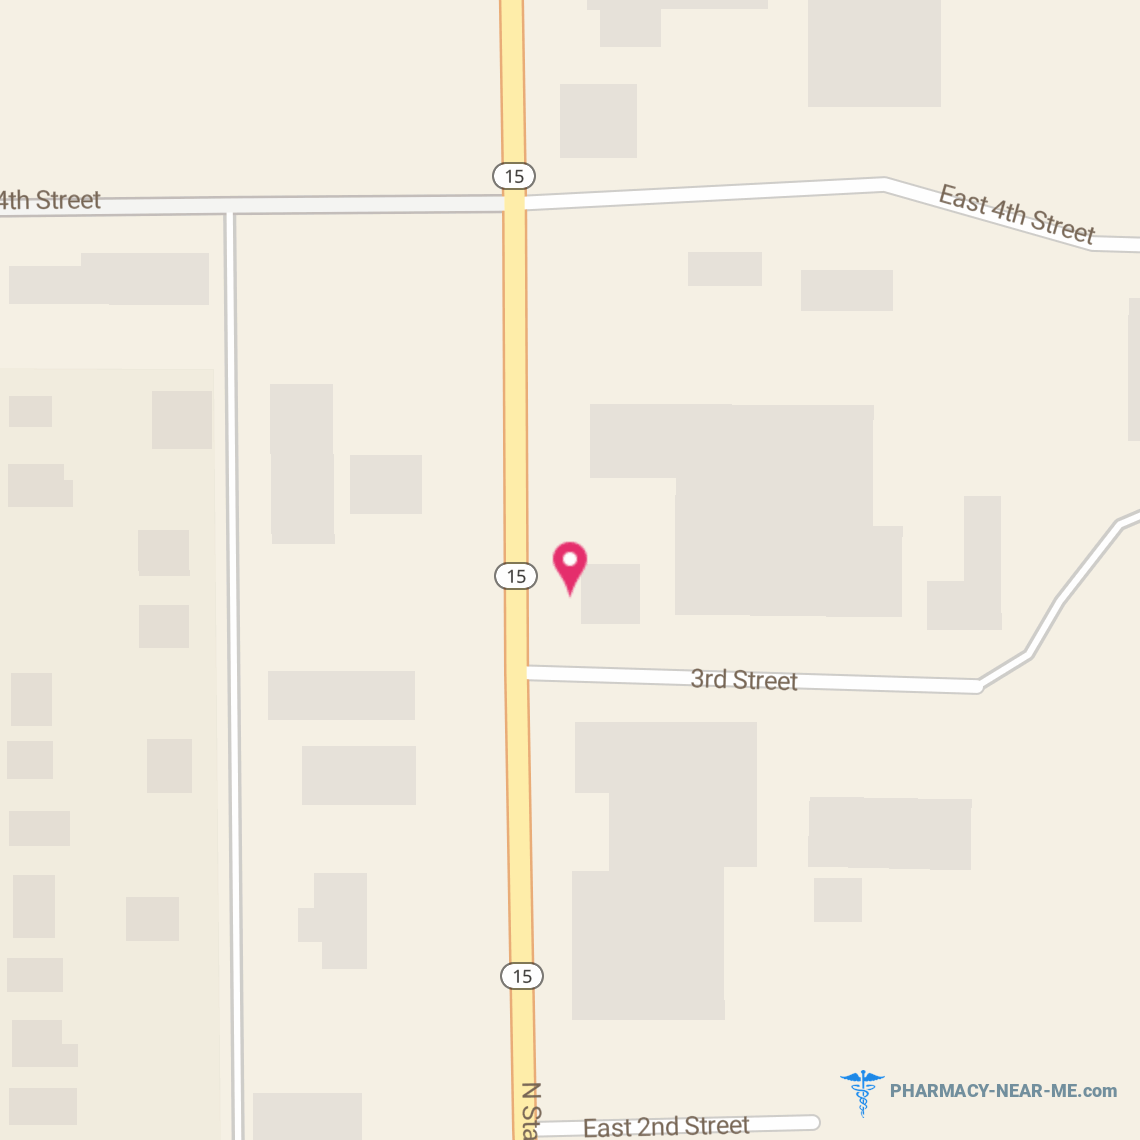 STERLING DRUG - Pharmacy Hours, Phone, Reviews & Information: 322 South State Street, Fairmont, Minnesota 56031, United States